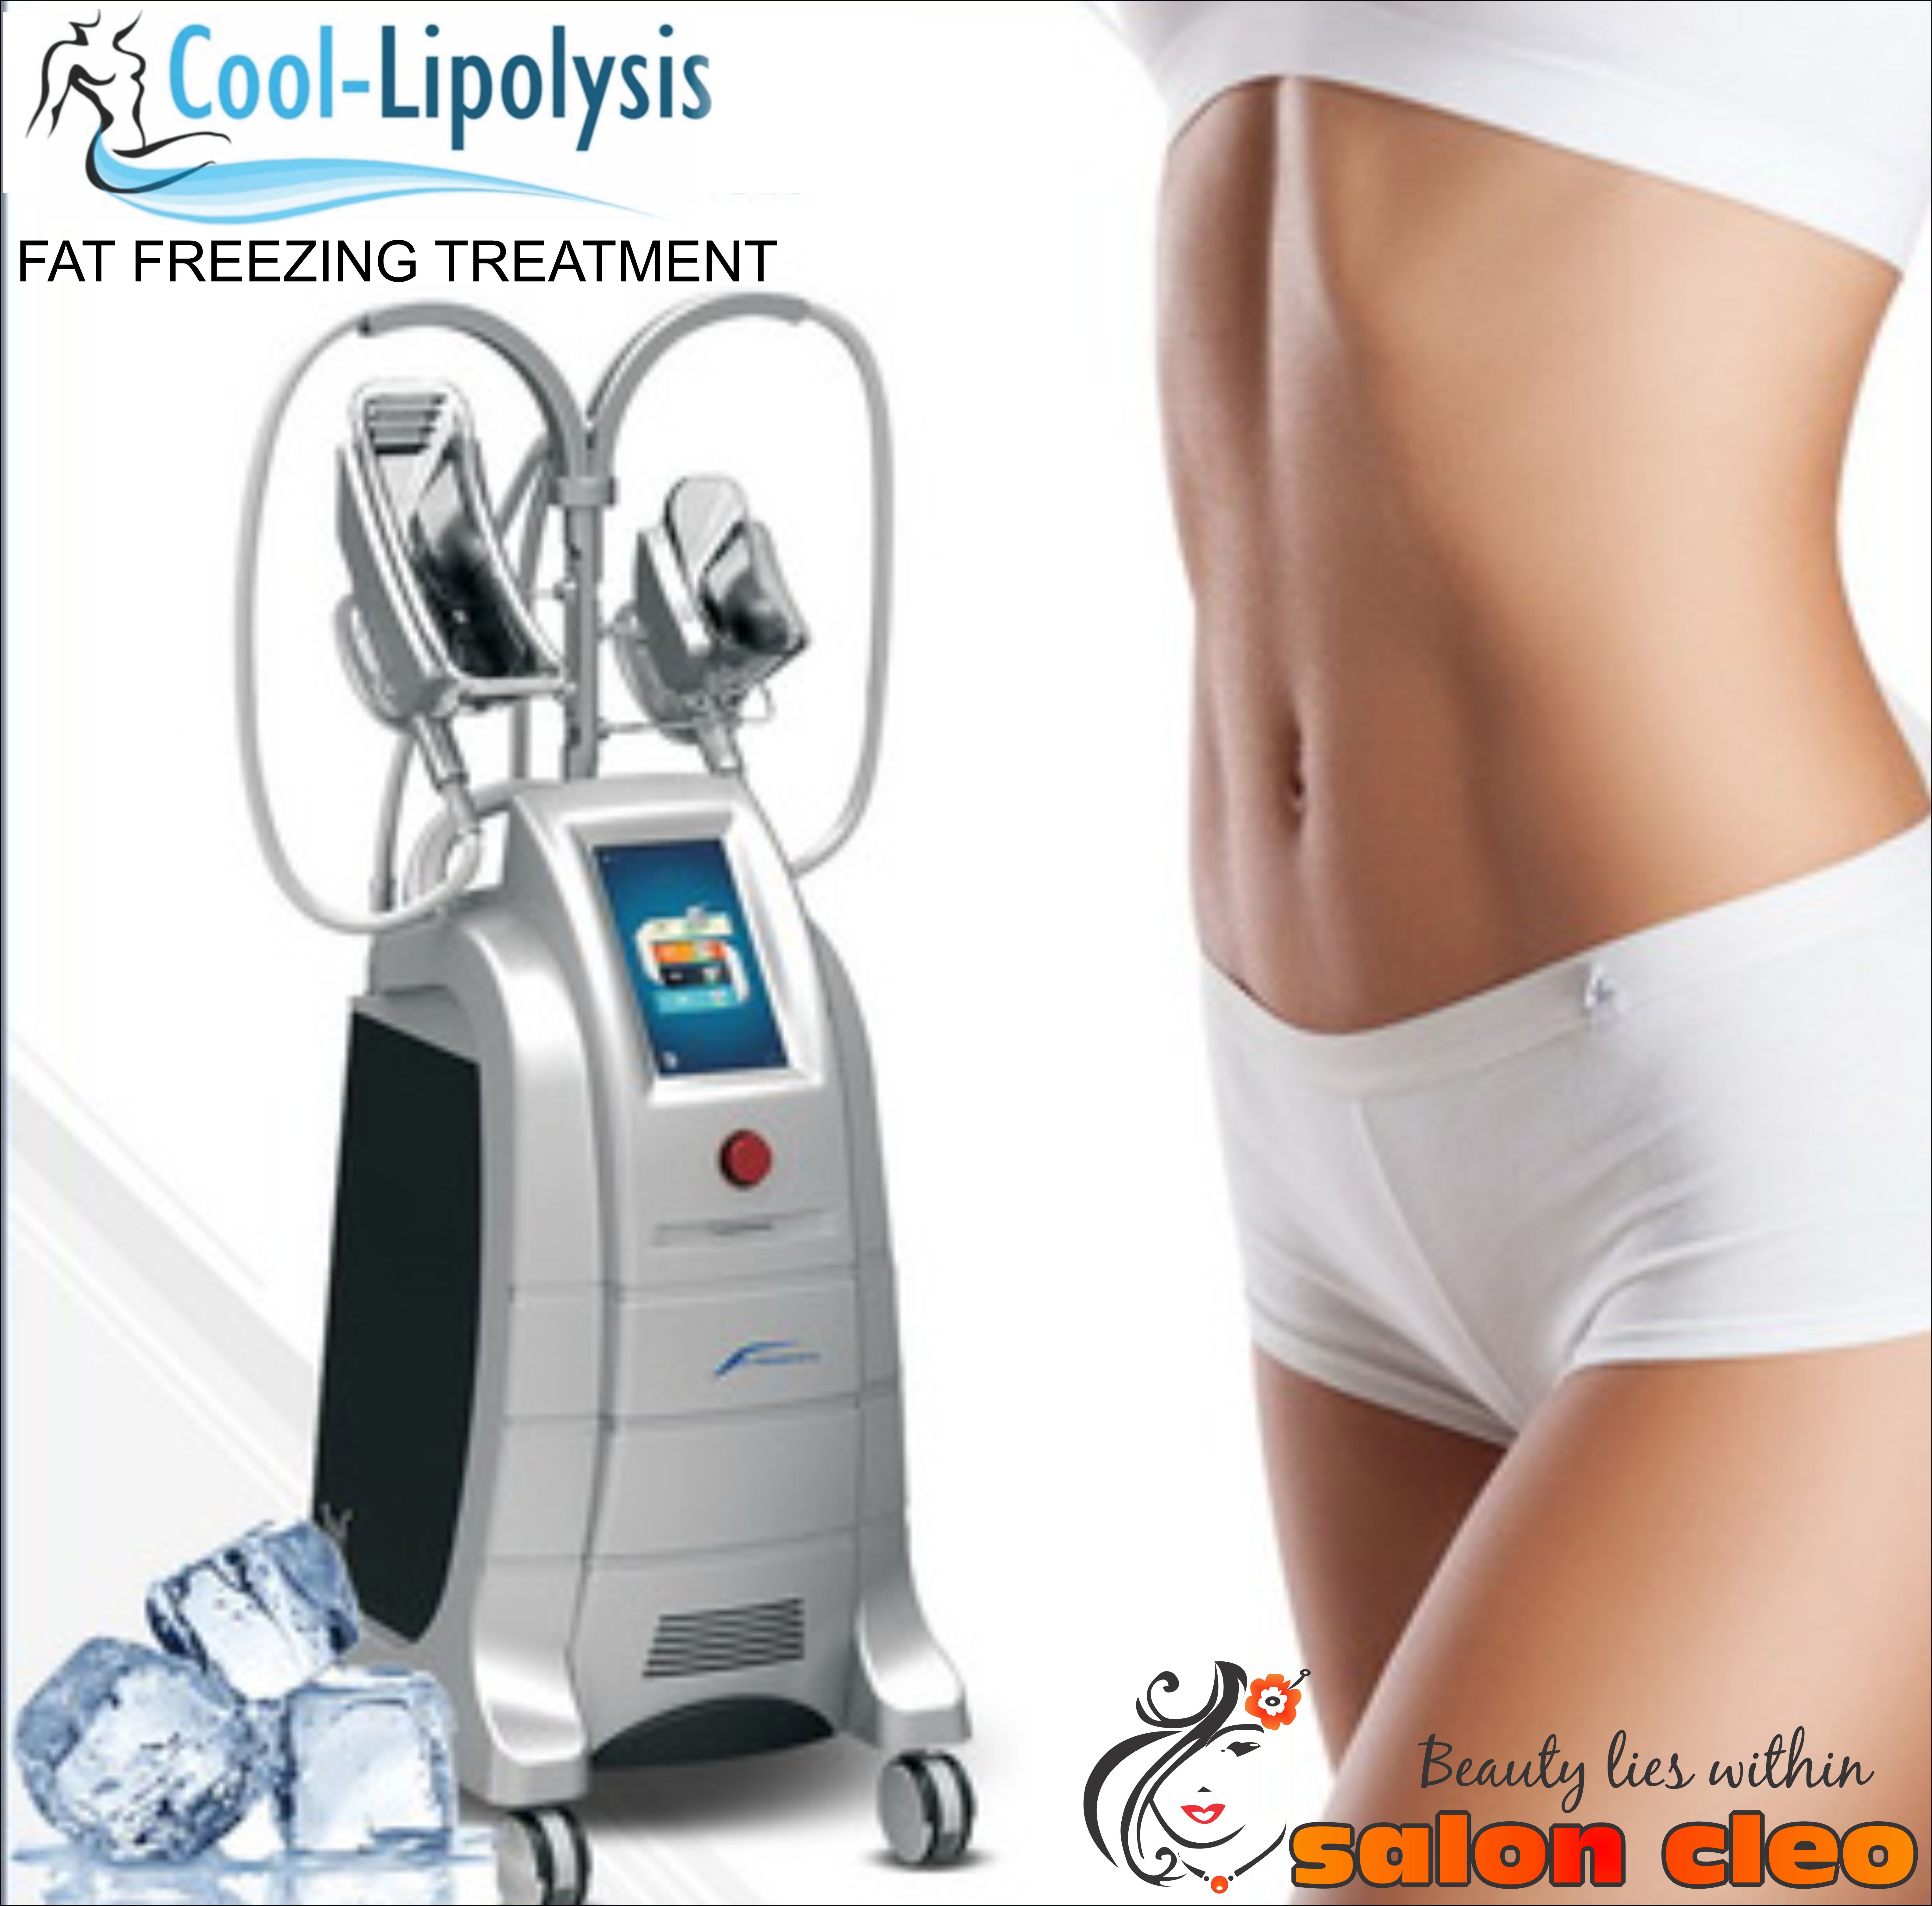 FAT FREEZING FAT BURNER COOL LIPOLYSIS TREATMENT AT SALON CLEO DURBAN PHOENIX 0315002353 Cool-lipolysis uses advanced cooling technology to selectively target fat bulges and eliminate fat cells through a gradual process that does not harm the surrounding tissue. When fat cells are exposed to precise cooling they trigger a process of natural elimination that gradually reduces the thickness of the fat layer. The fat cells in the treated area are gently eliminated through the bodys normal  